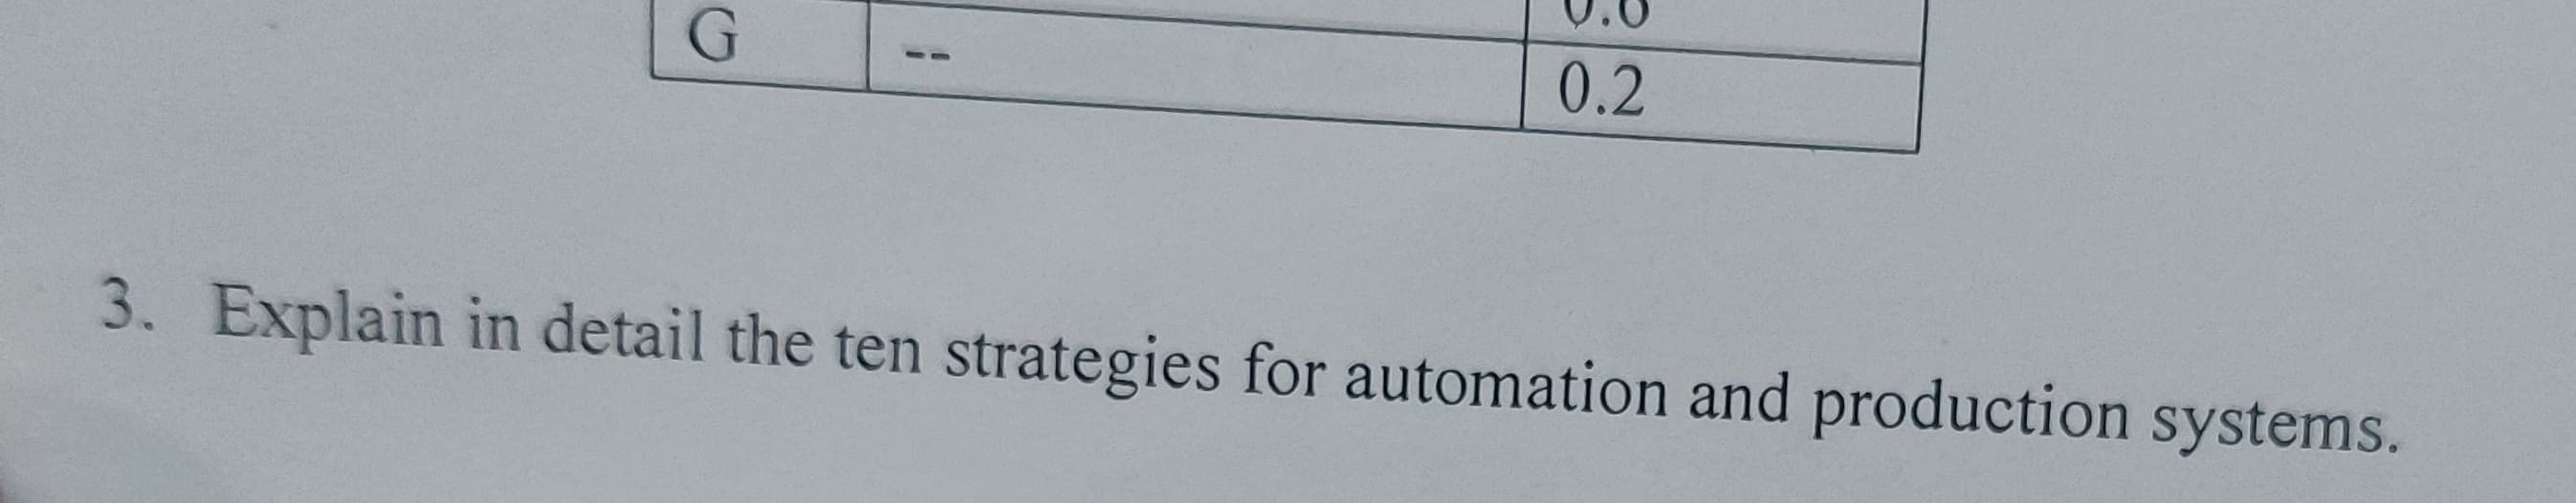 G
0.2
3. Explain in detail the ten strategies for automation and production systems.